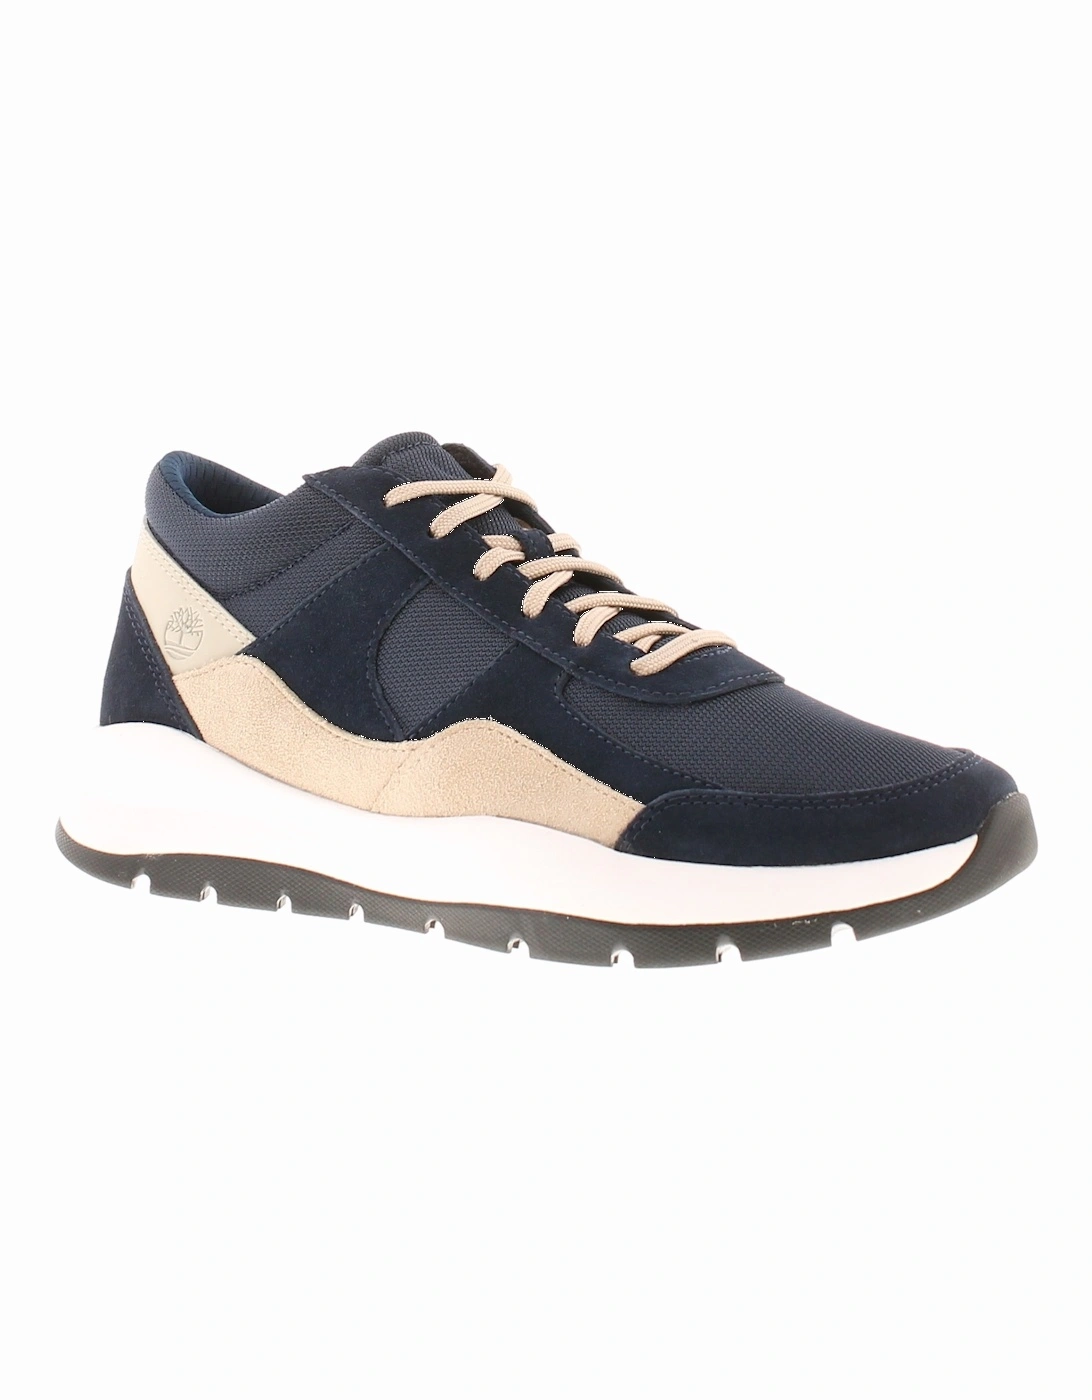 Mens Trainers Boroughs fl Super ox Lace Up navy UK Size, 6 of 5